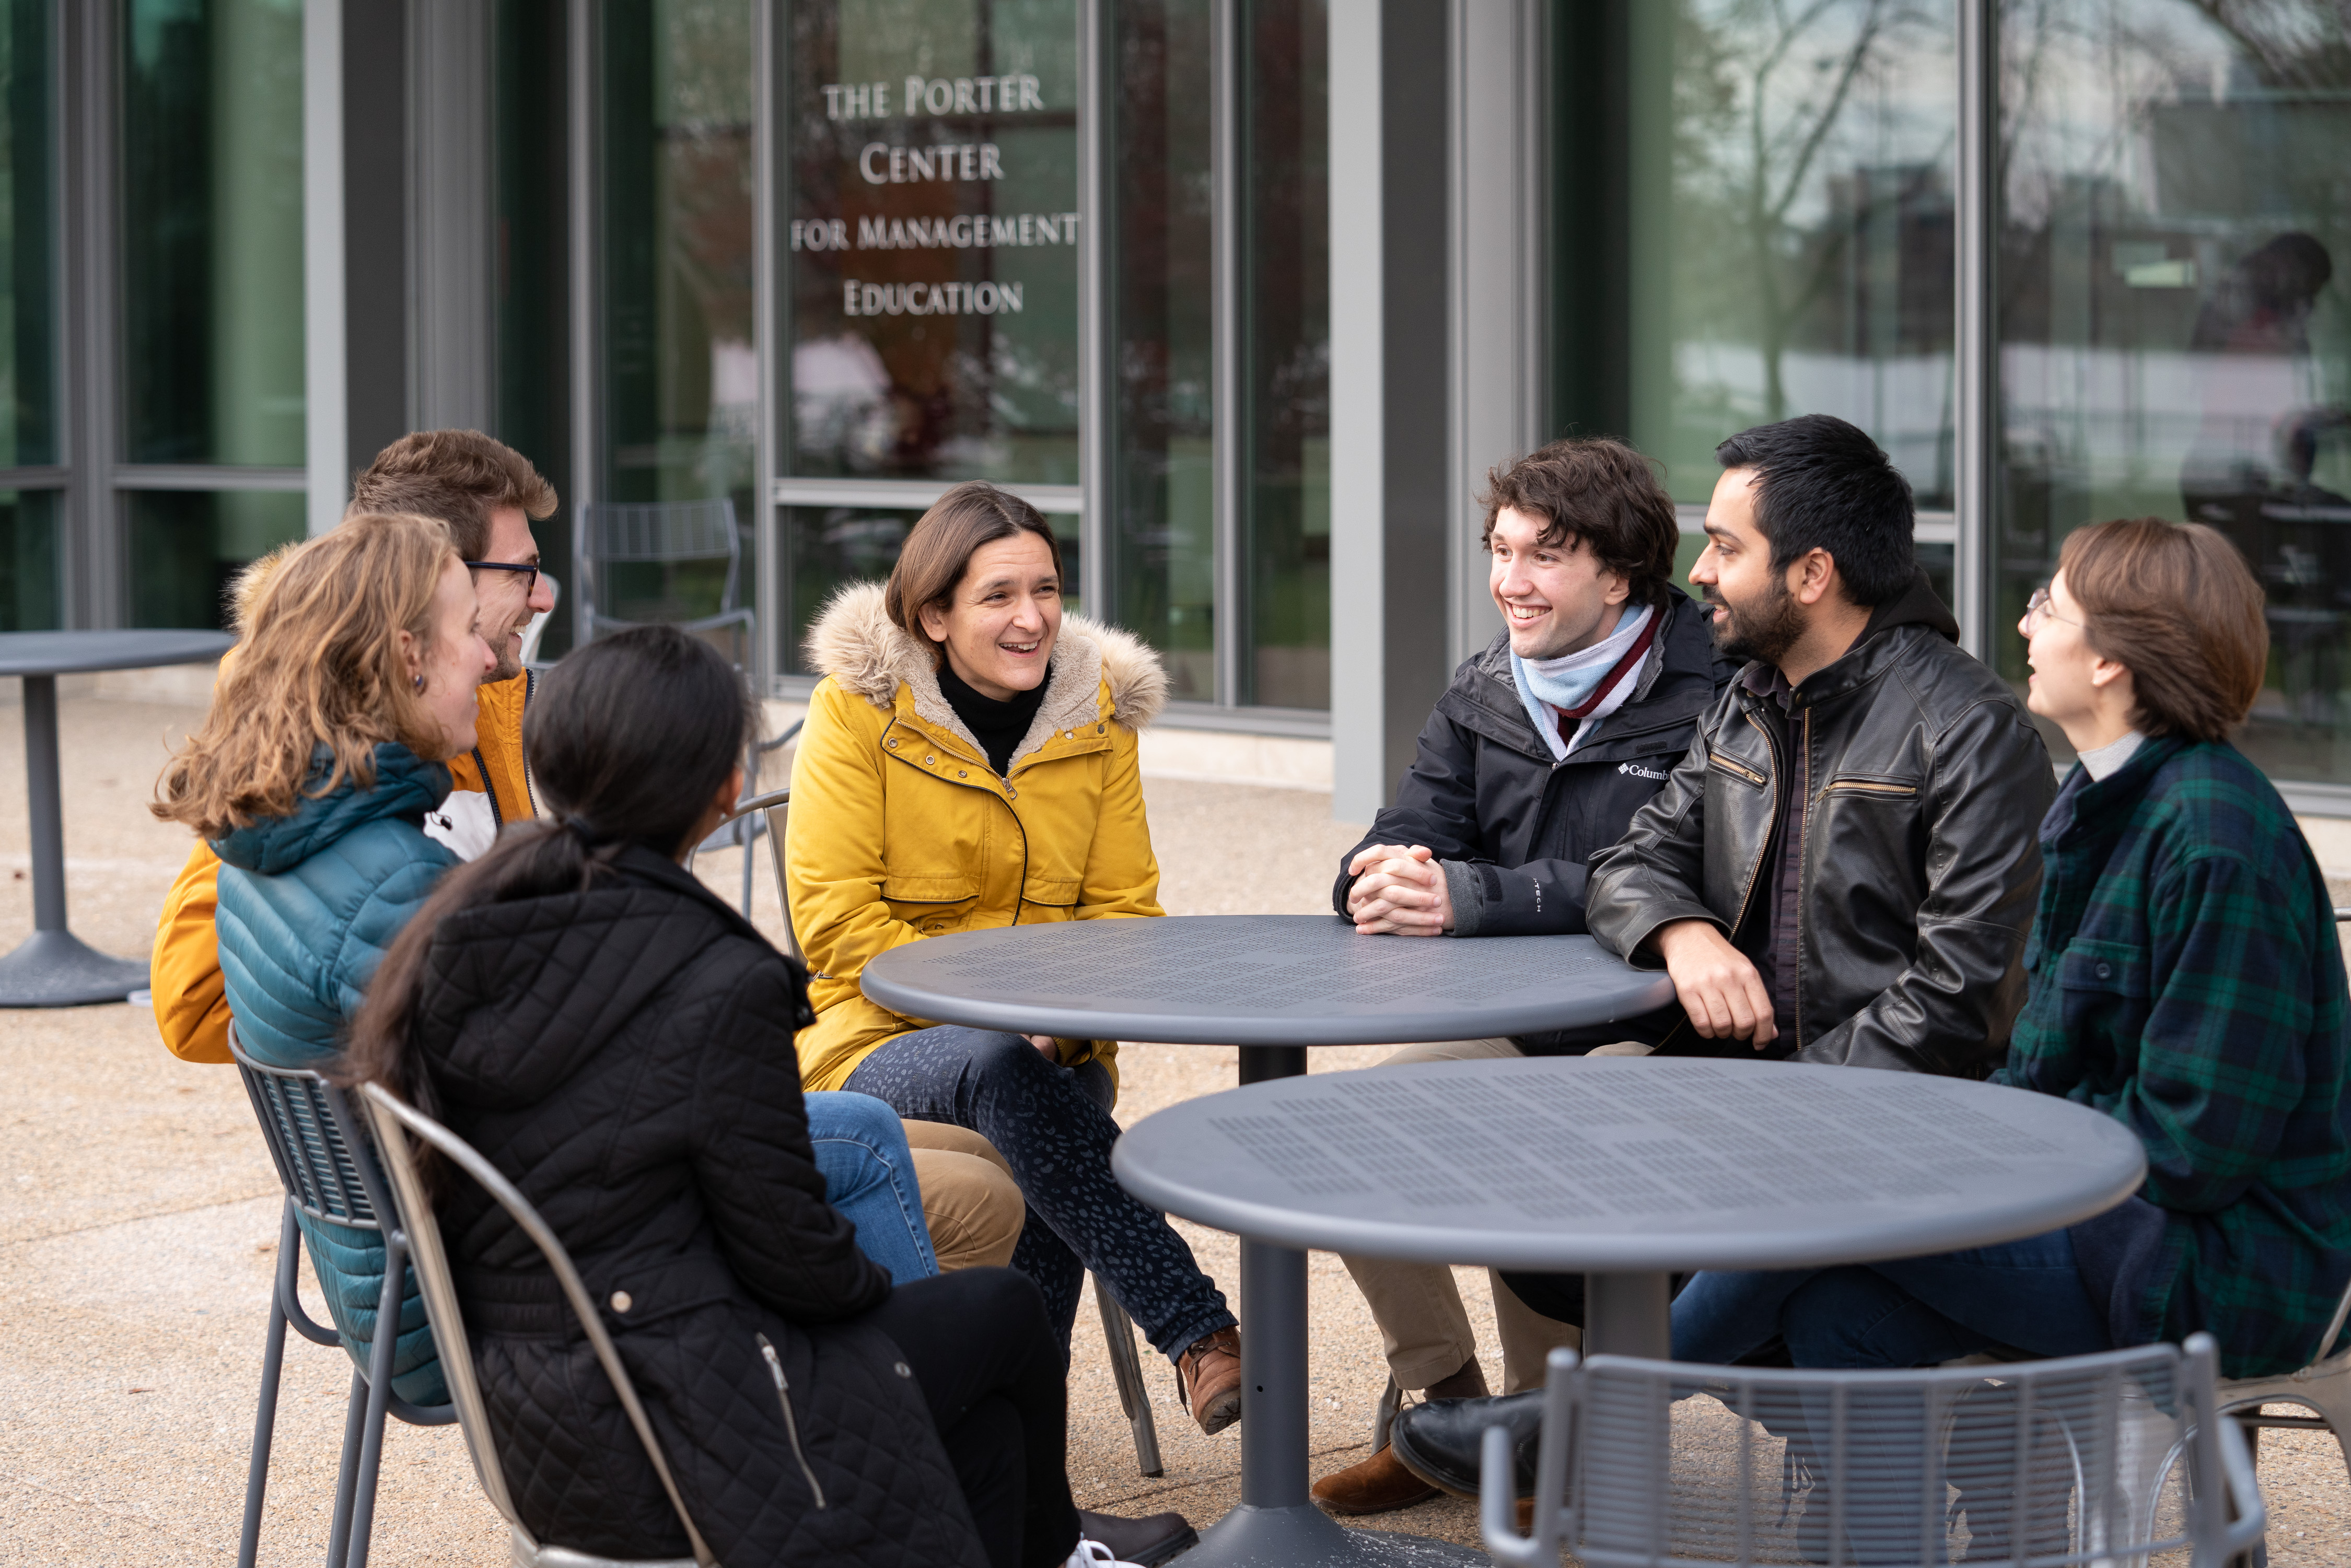 MIT Professor Esther Duflo (center) chats with some of her graduate students.